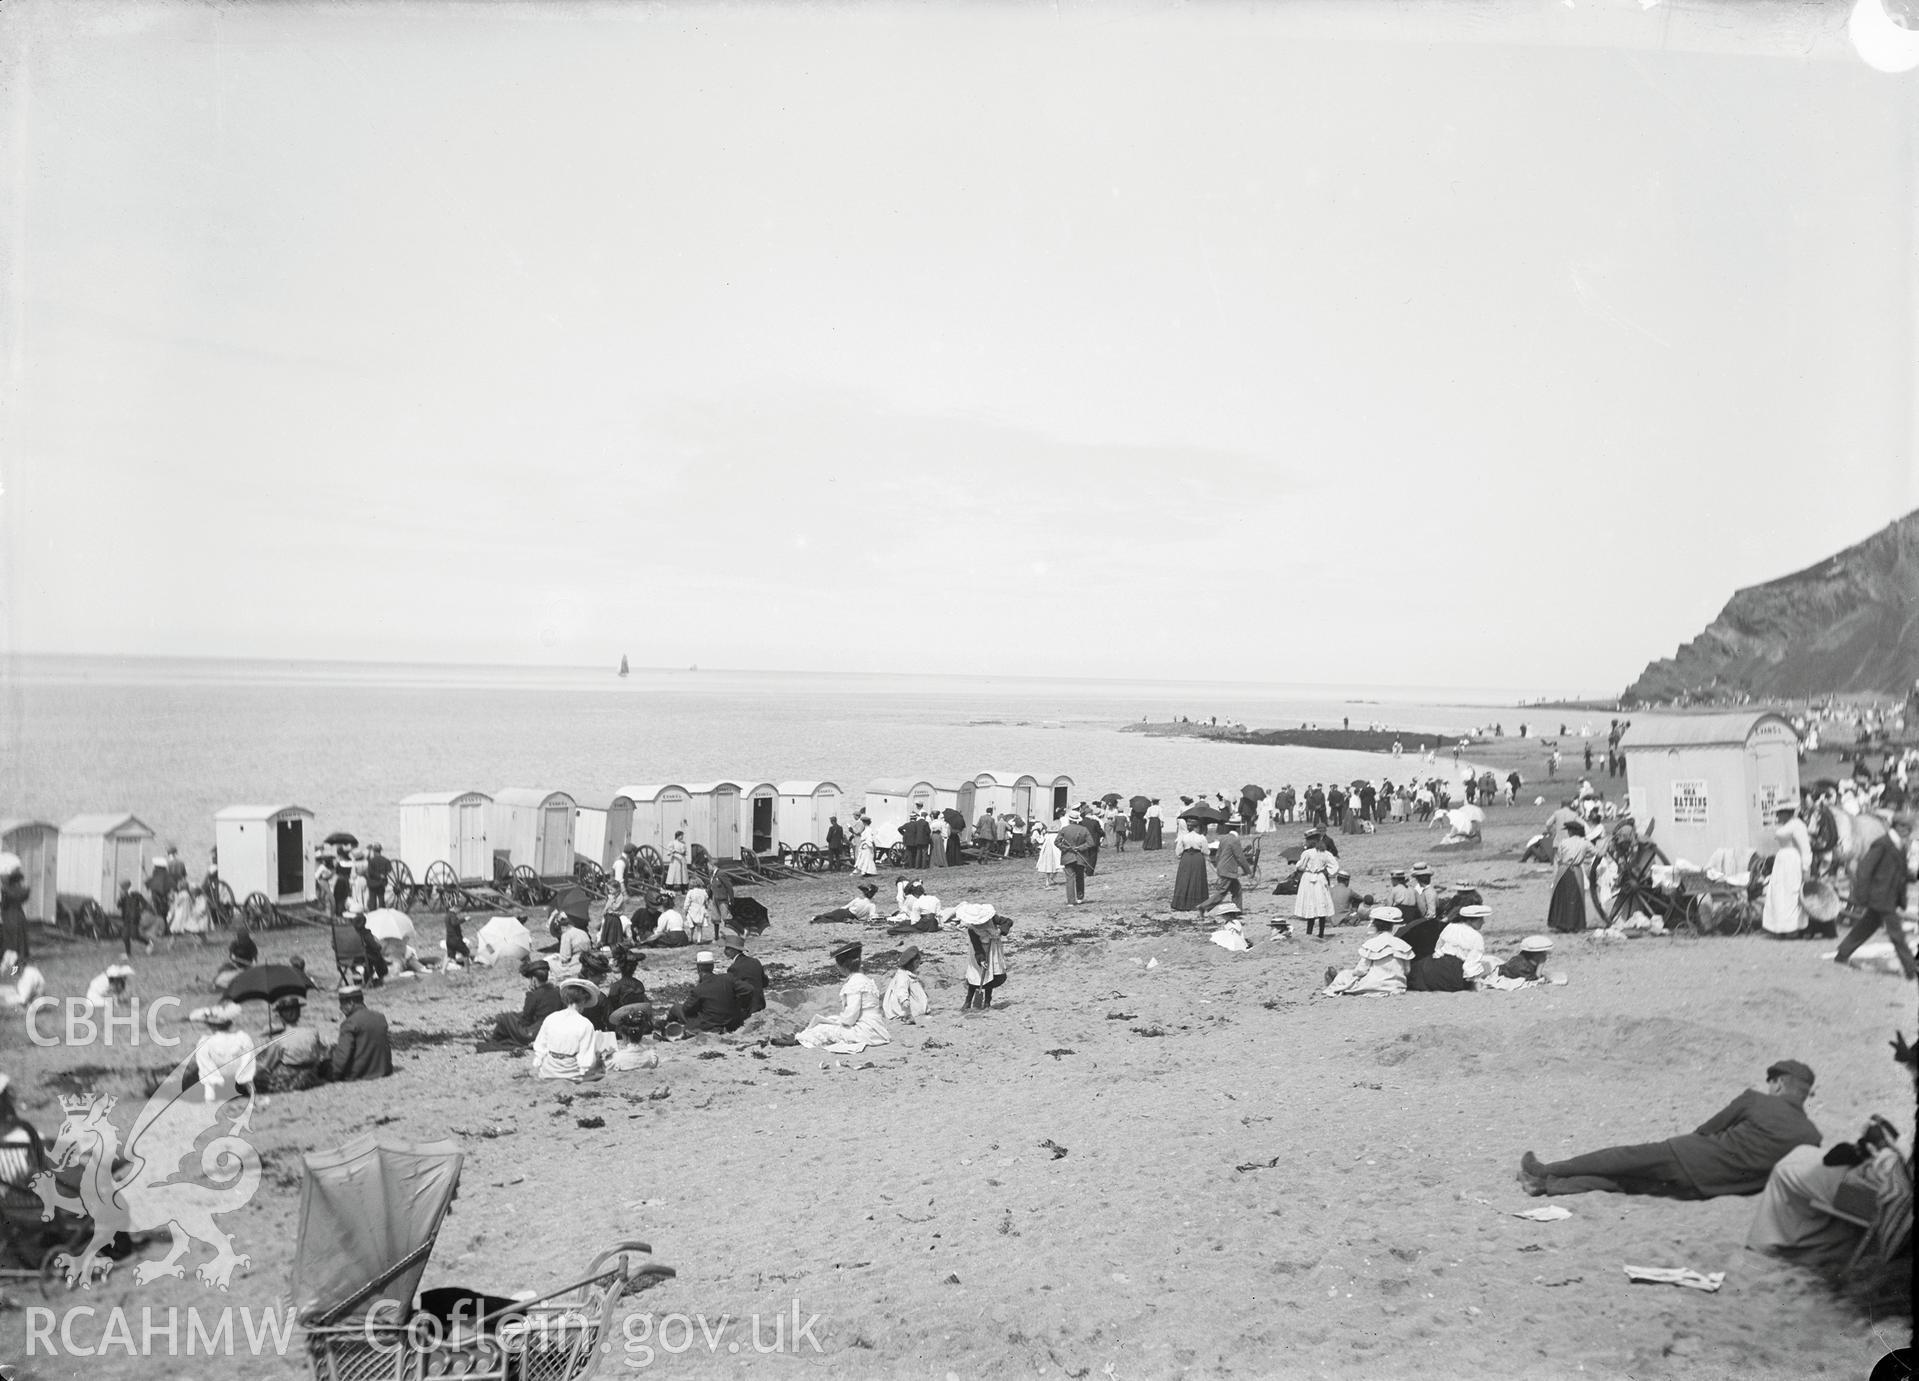 Black and white image dating from c.1910 showing a busy beach scene at Aberystwyth Castle,  taken by Emile T. Evans.